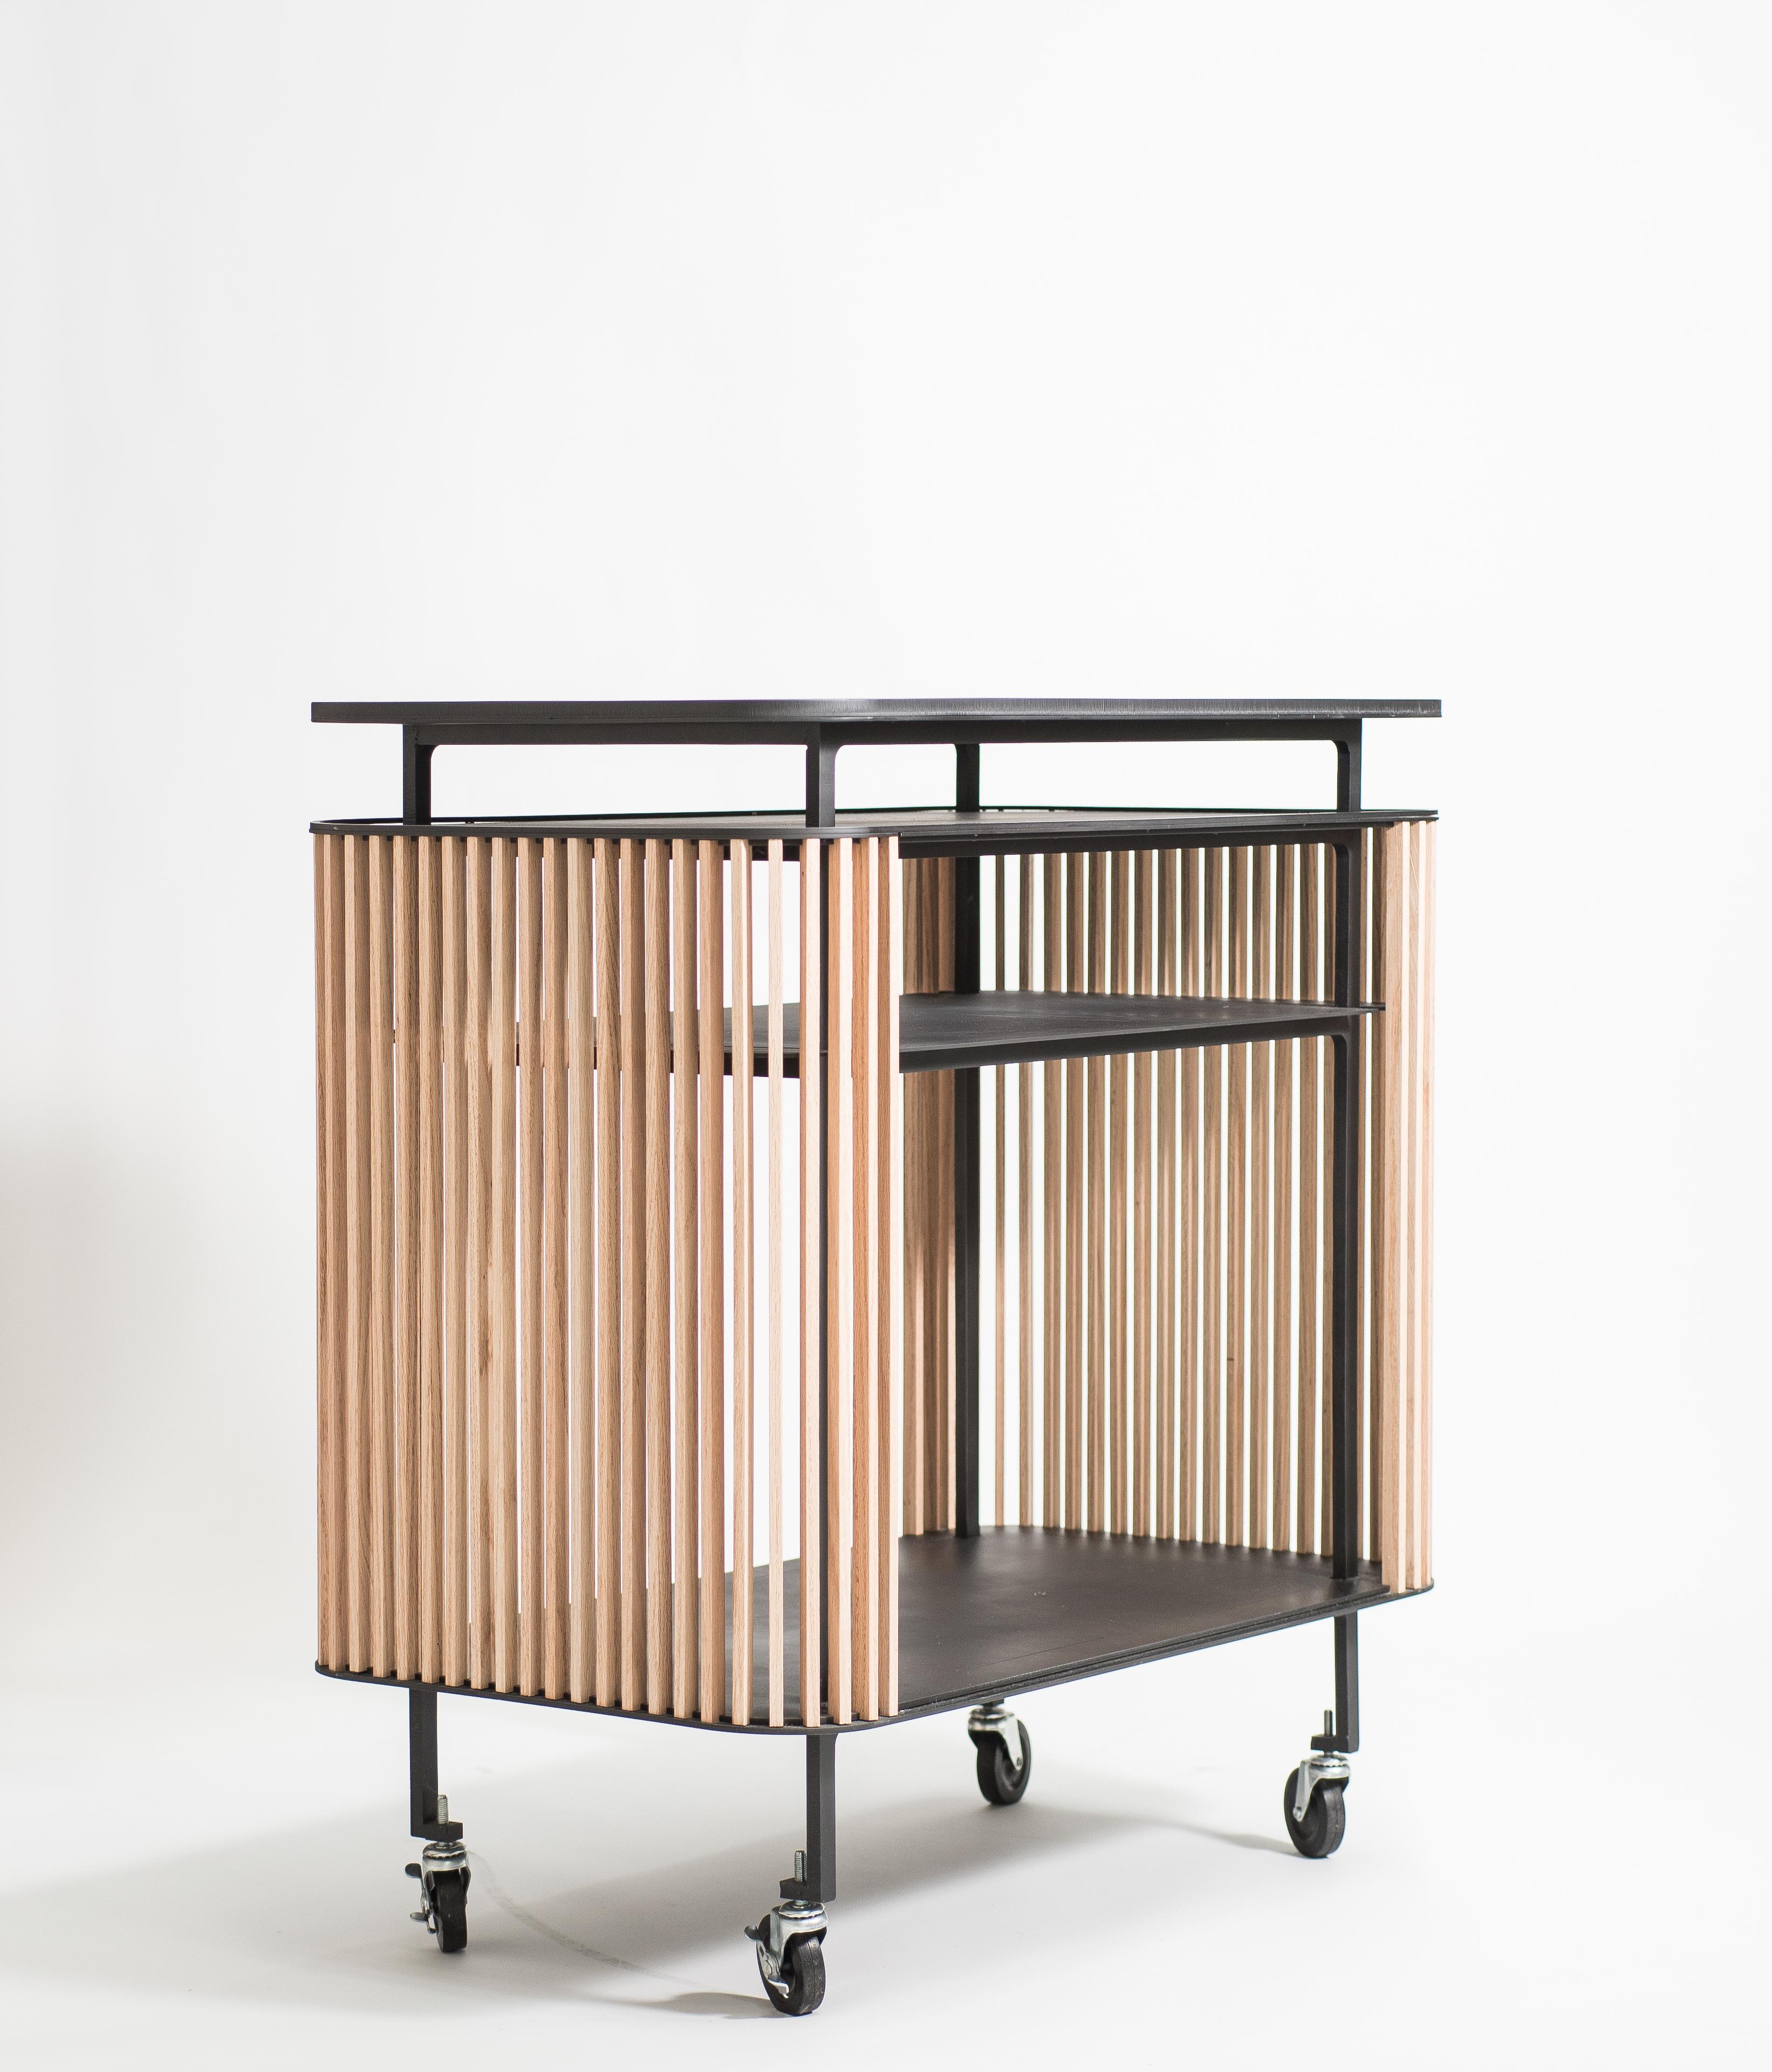 Bar cart has been developed as a new addition to our favourite dry bar unit. The curvaceous laser cut steel form is adjusted to allow for mobility and with removal of door hardware, the piece functions as a lighter, more porous movable bar cart. A